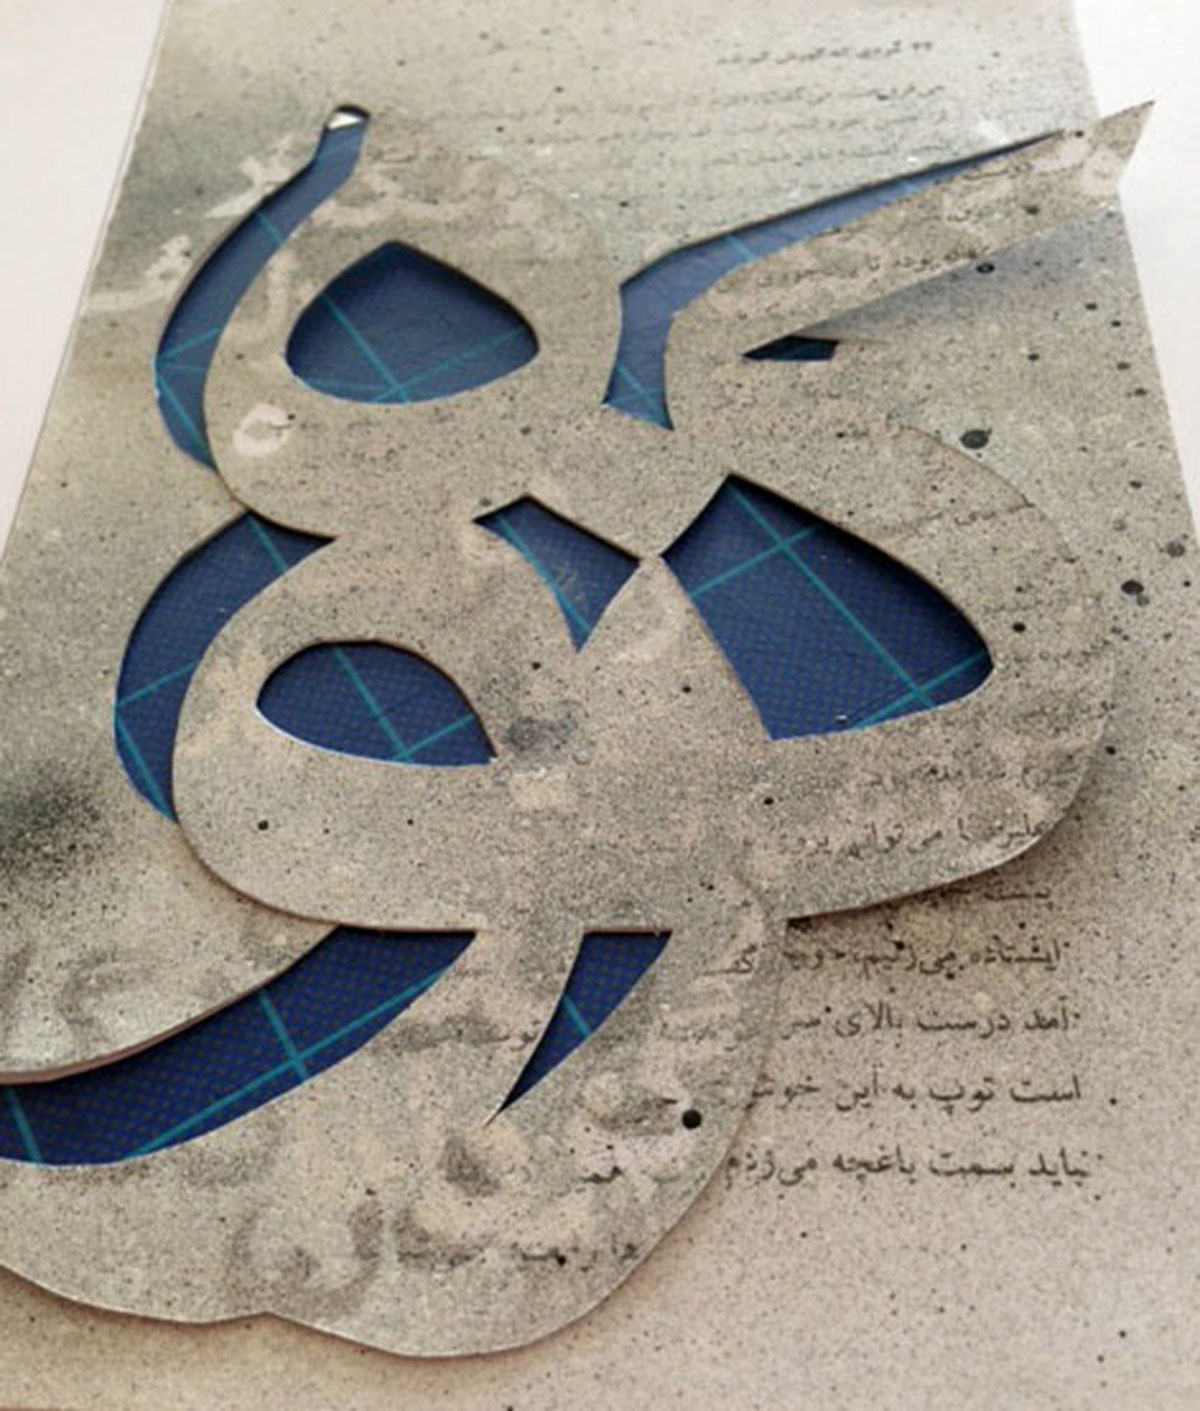 Poster Design Spray painting Calligraphy and Farsi type